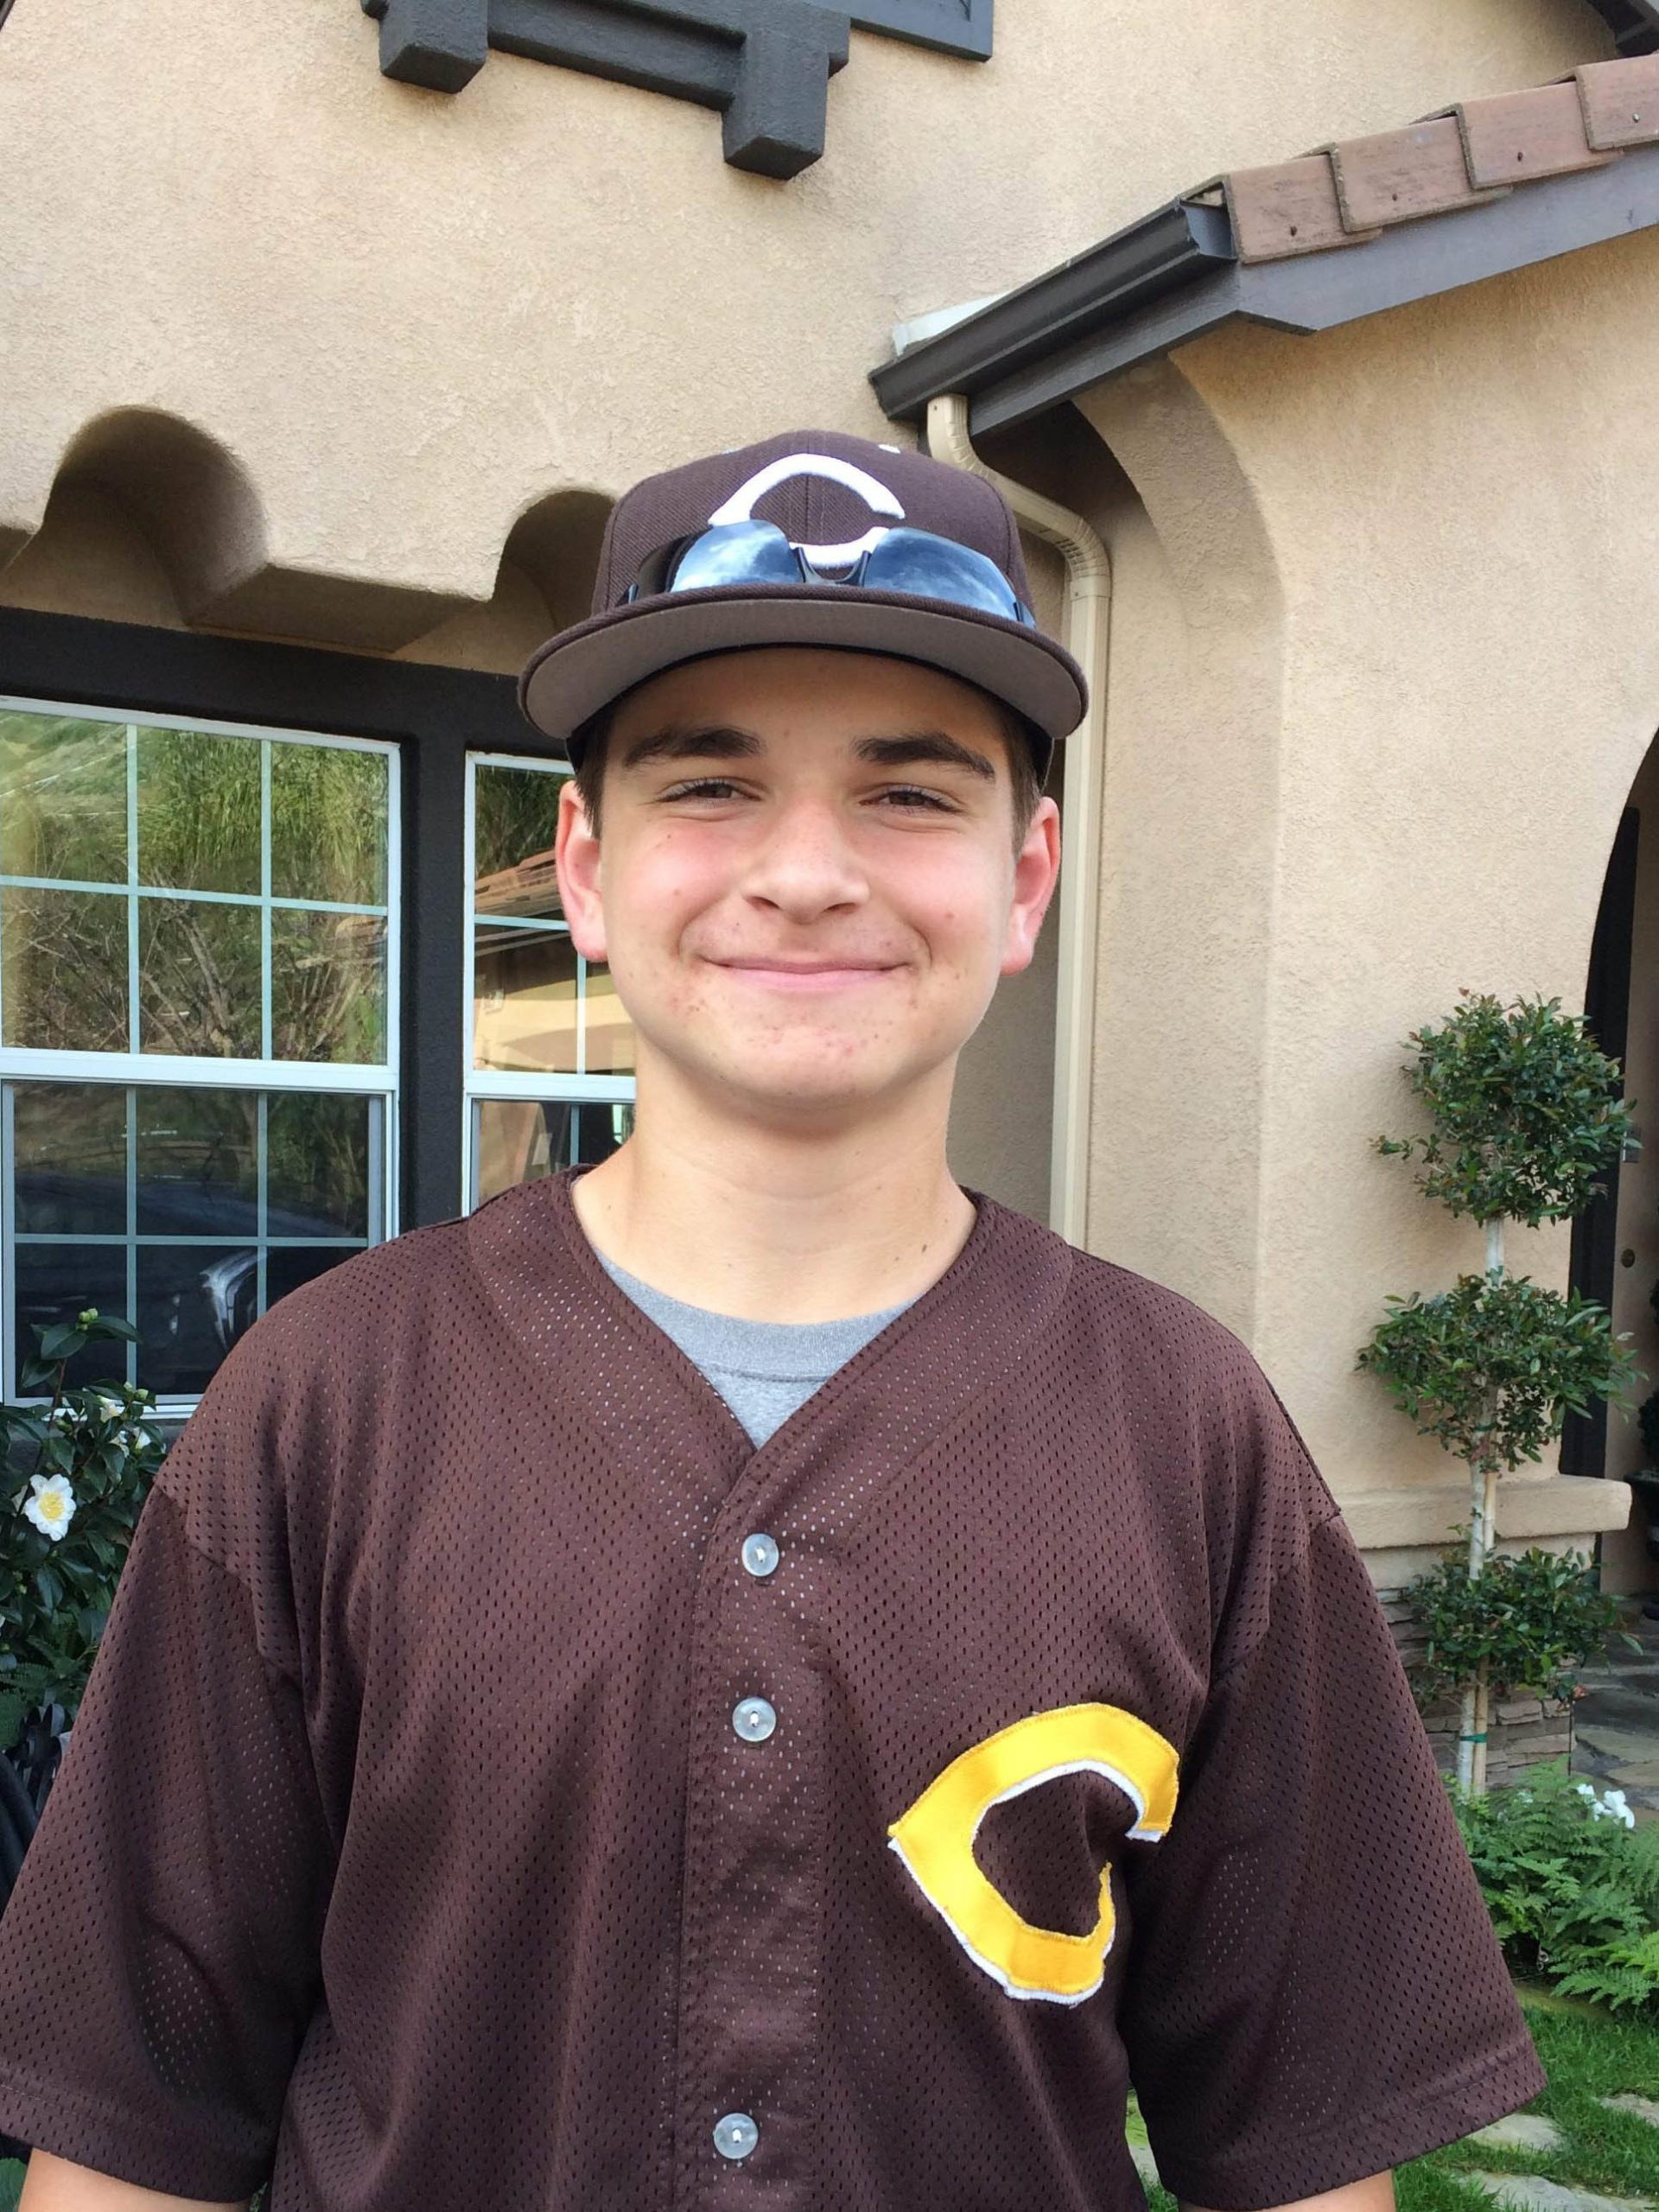 CHOC patient Caron standing outside his house wearing baseball uniform